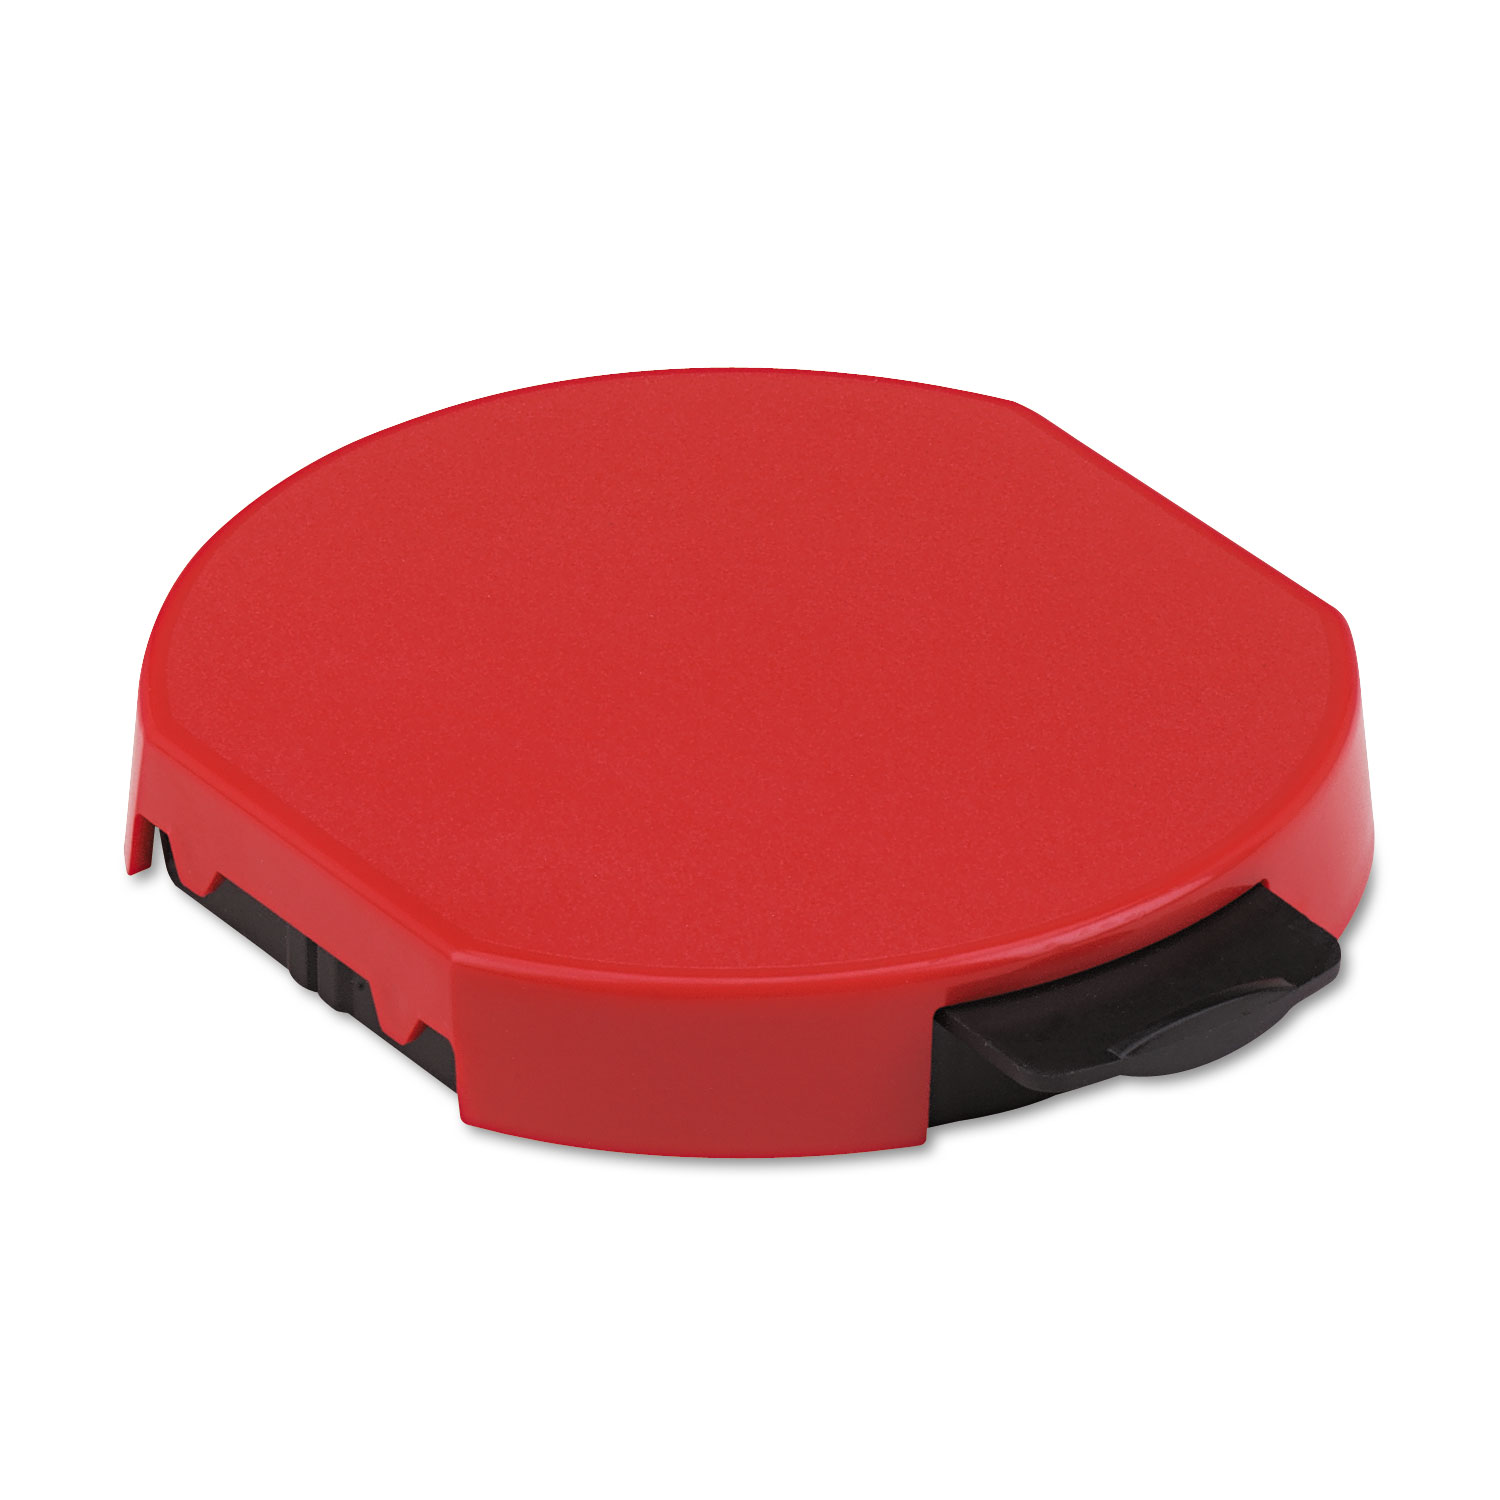 Trodat T5415 Stamp Replacement Ink Pad, 1 3/4, Red